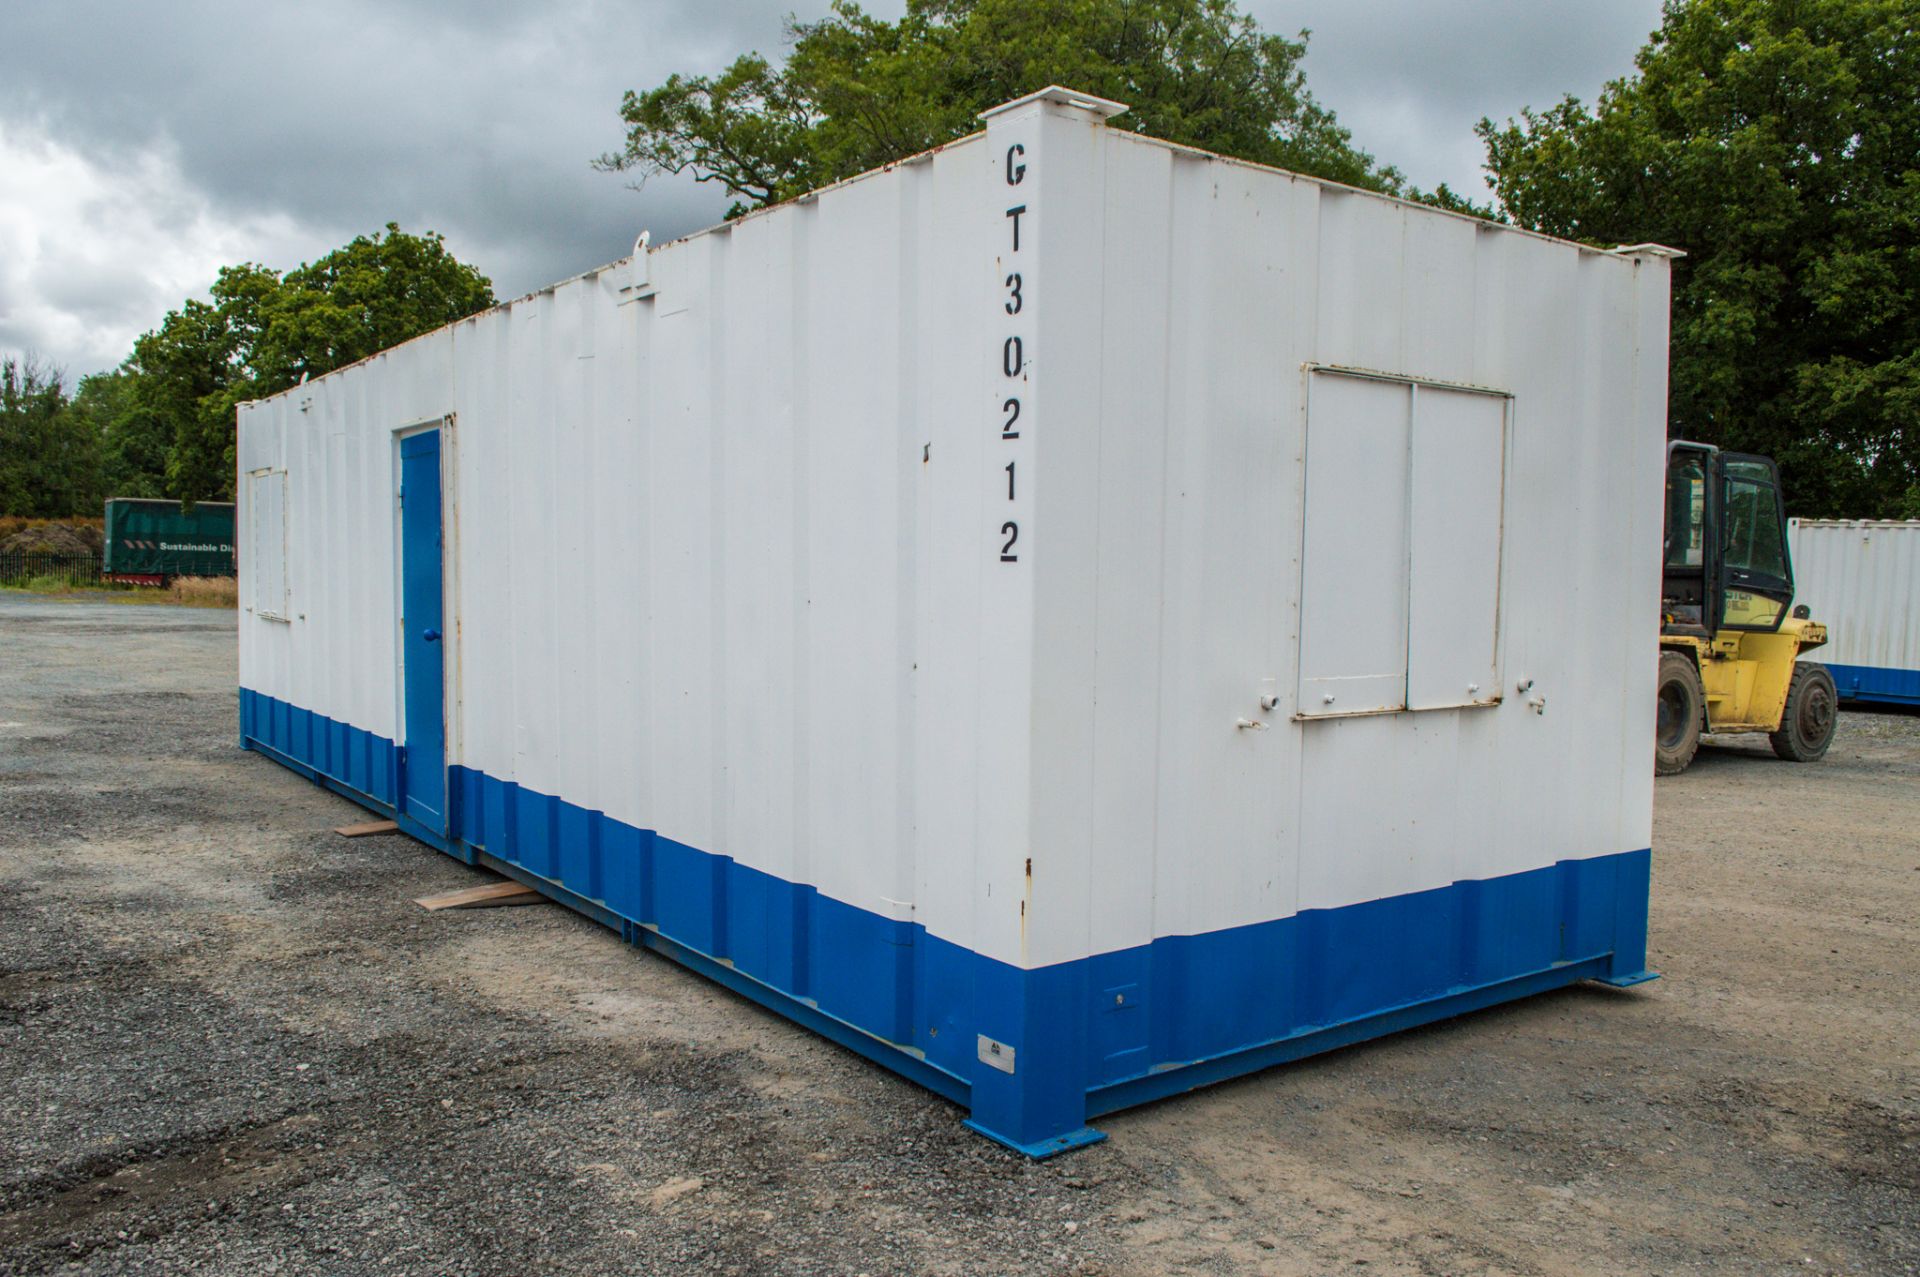 32ft x 10ft steel anti office site unit ** No keys but the doors are unlocked ** GT30212 - Image 4 of 6